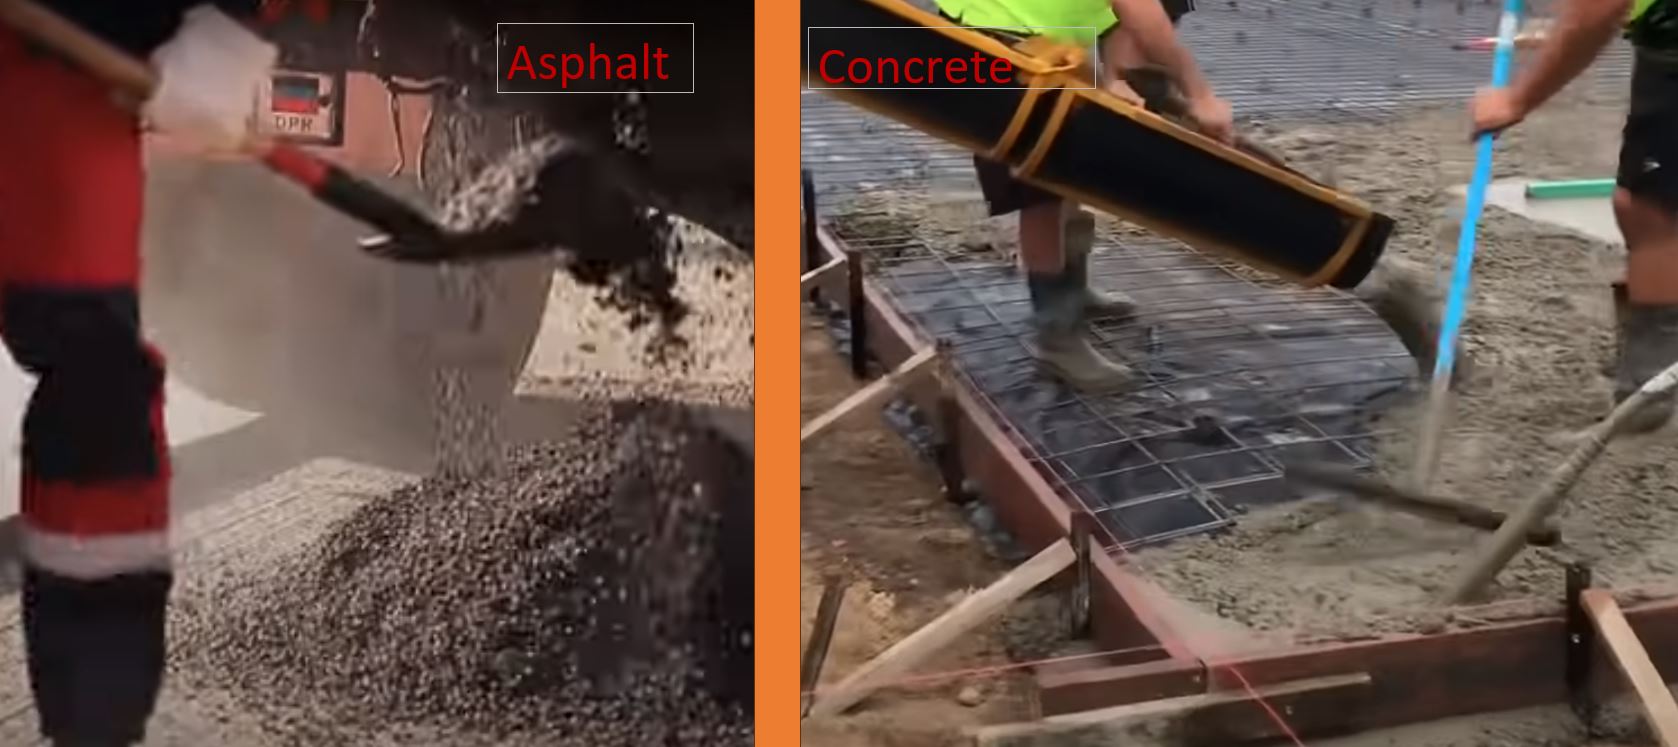 Are There Differences in the Lifespan of Asphalt vs. Concrete?